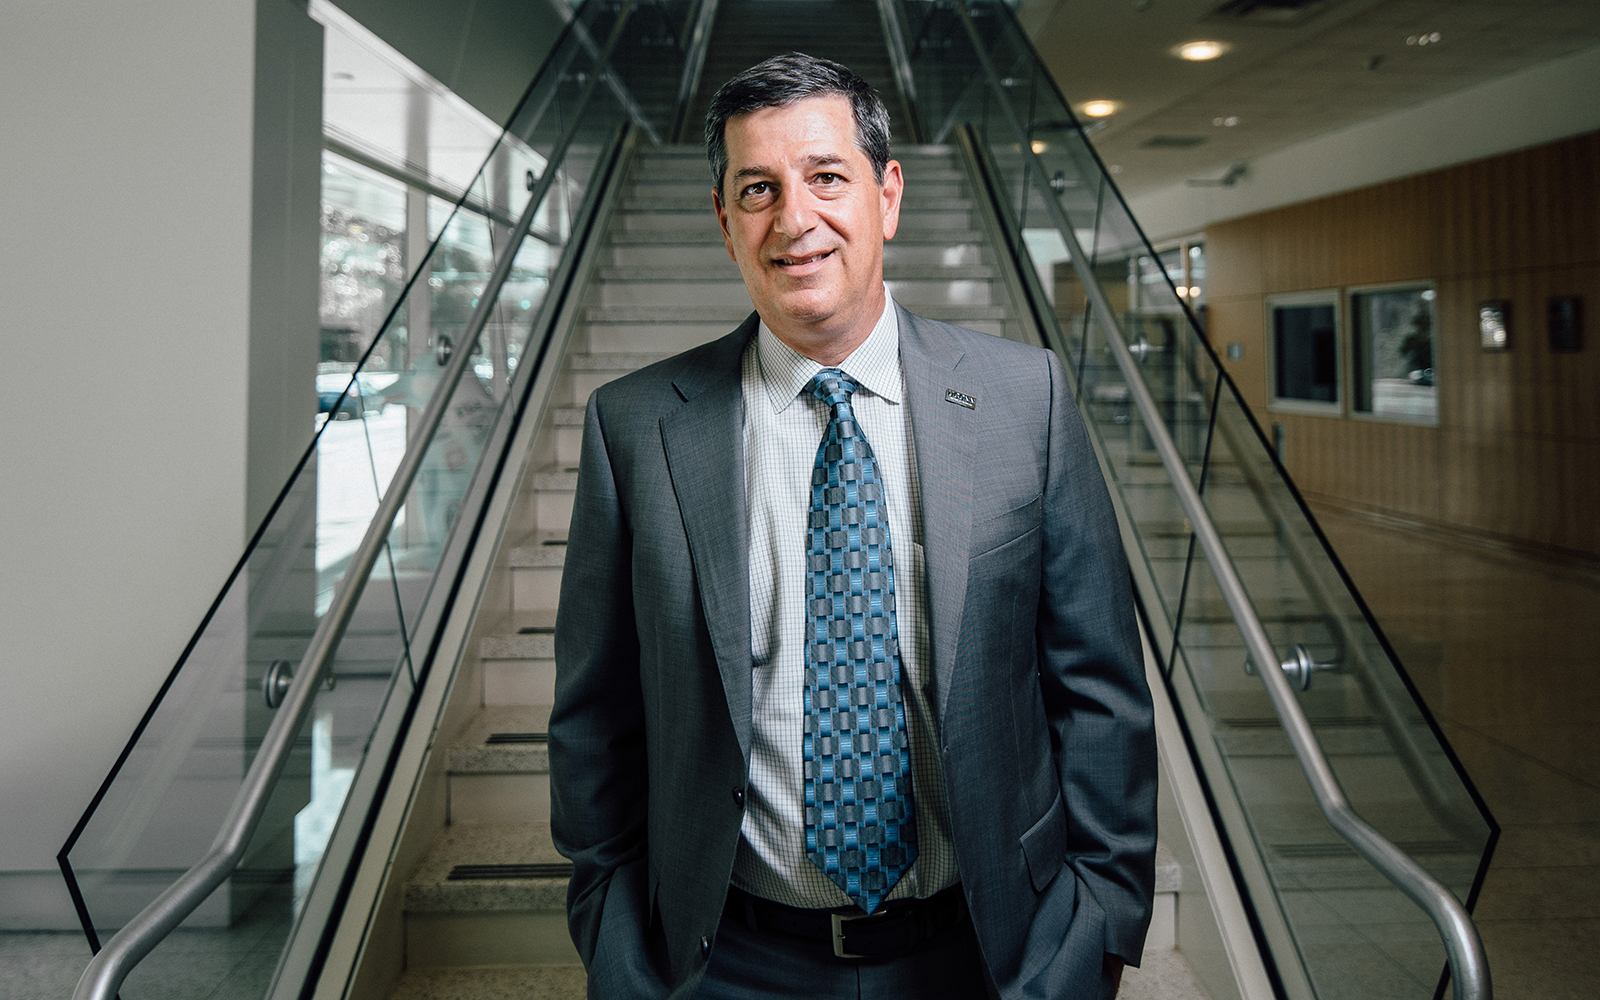 Former Walmart CEO Bill Simon poses in front of an escalator in the UConn Stamford campus. 